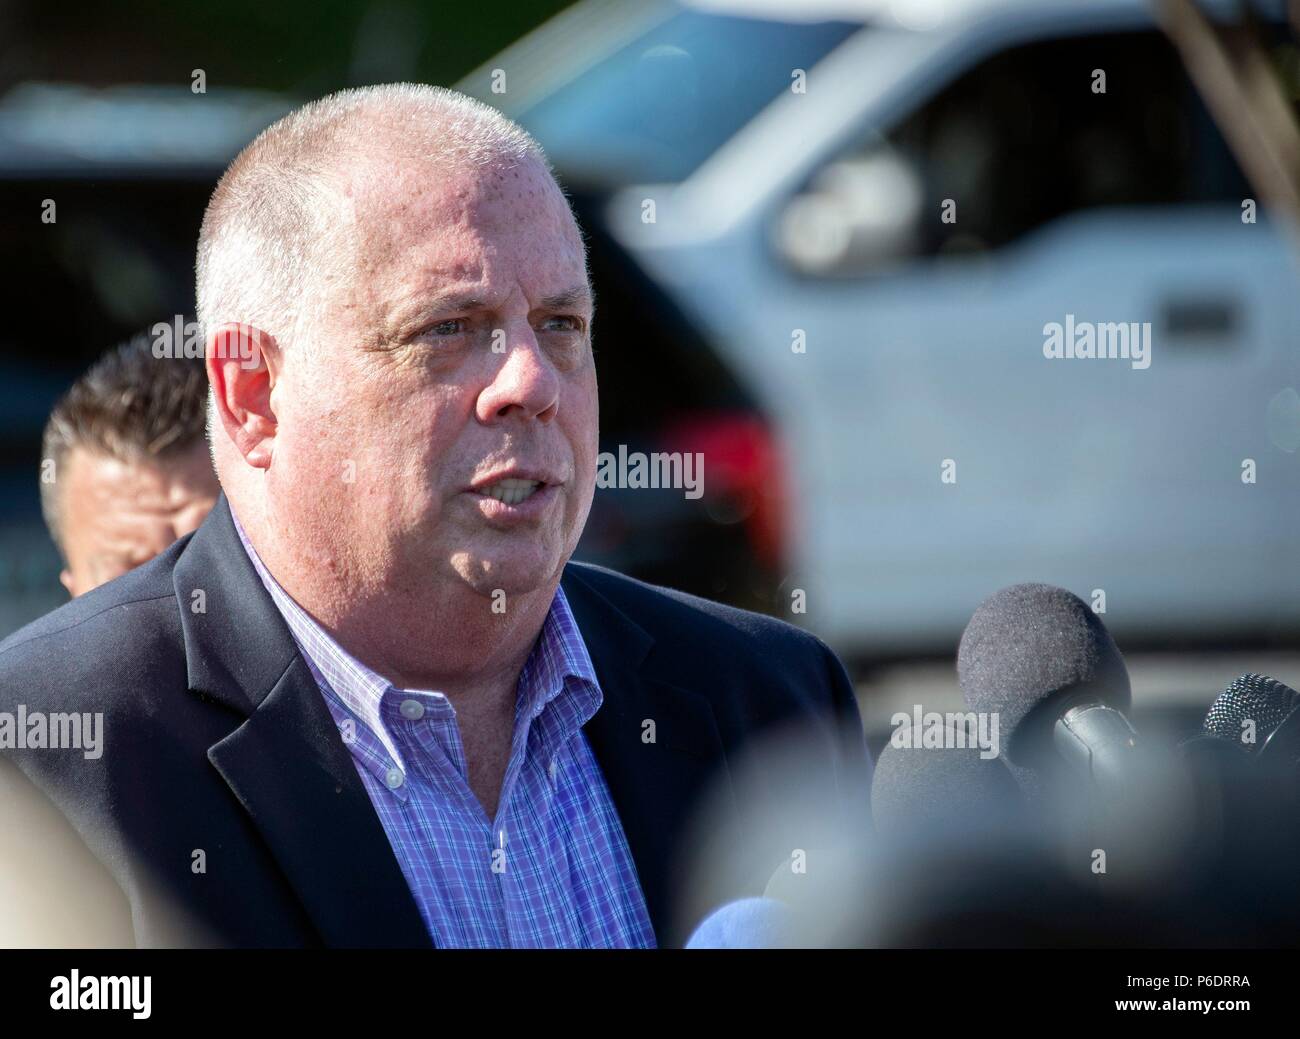 Governor Larry Hogan (Republican of Maryland) speaks to reporters after a gunman opened fire the Capital Gazette newspaper killing five people and injuring many others on Thursday, June 28, 2018. Credit: Ron Sachs / CNP (RESTRICTION: NO New York or New Jersey Newspapers or newspapers within a 75 mile radius of New York City) | usage worldwide Stock Photo